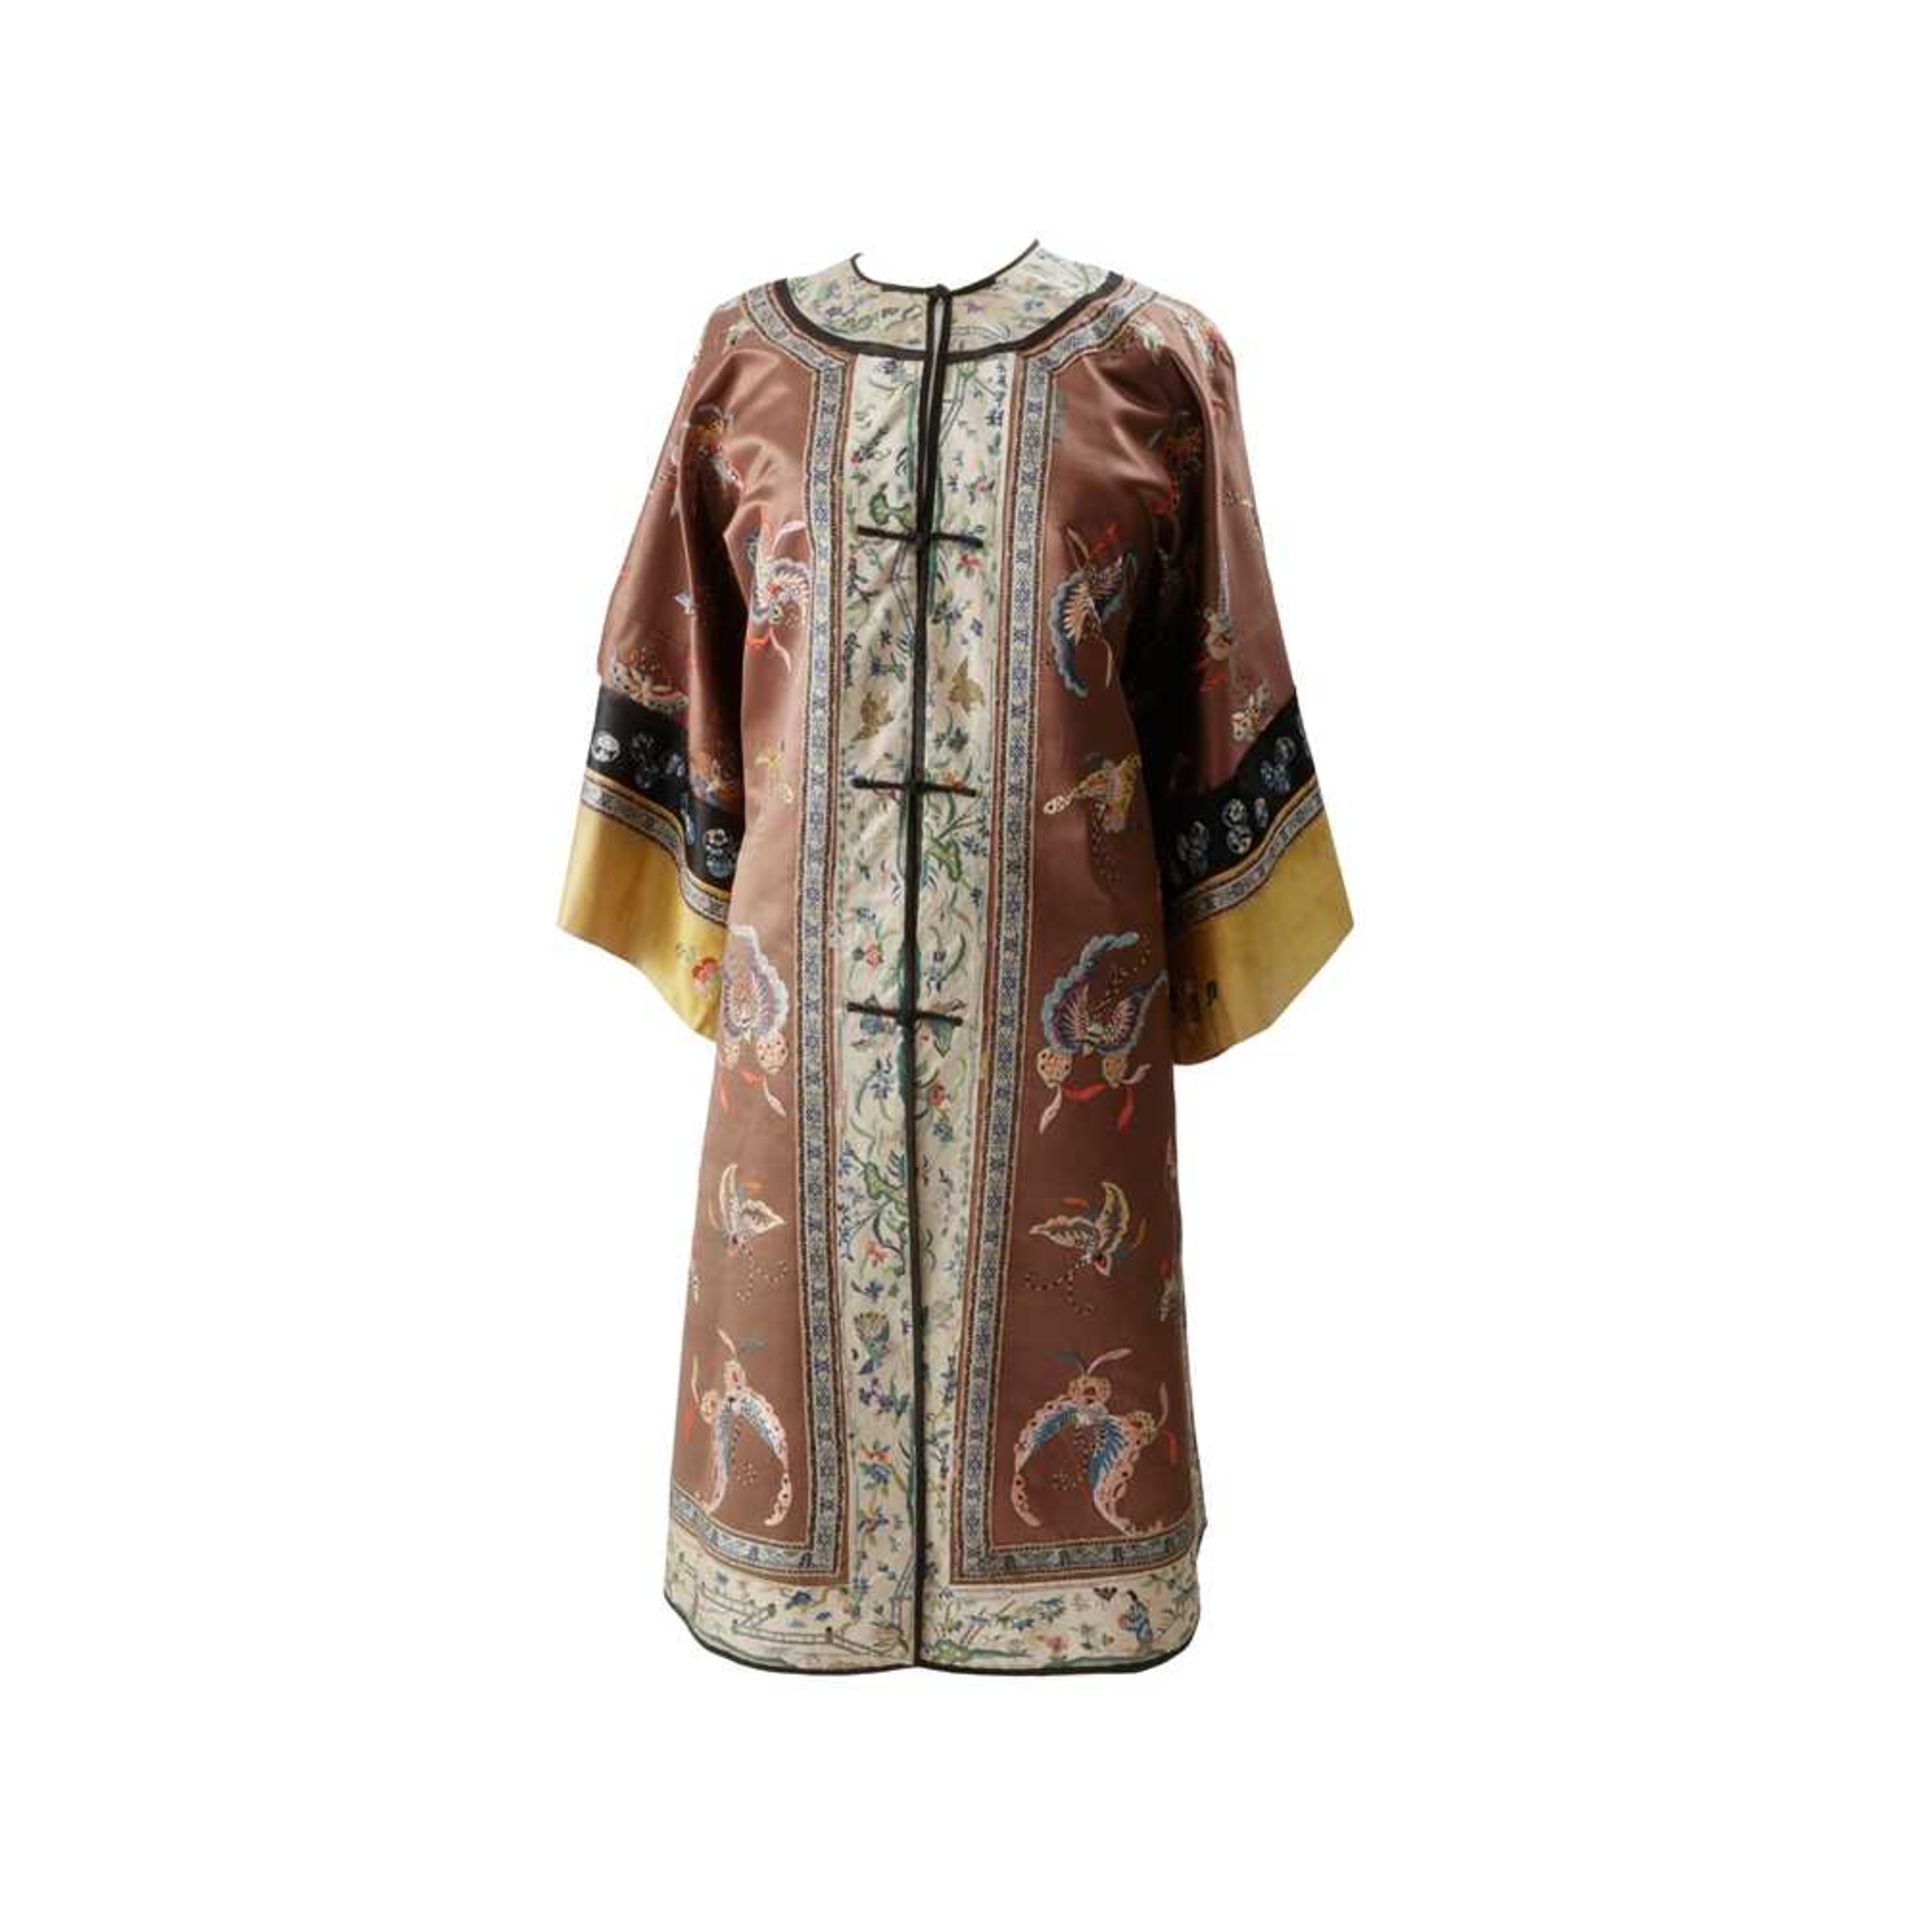 PERSIMMON-GROUND SILK EMBROIDERED LADY'S OVERCOAT LATE QING DYNASTY-REPUBLIC PERIOD, 19TH-20TH CENTU